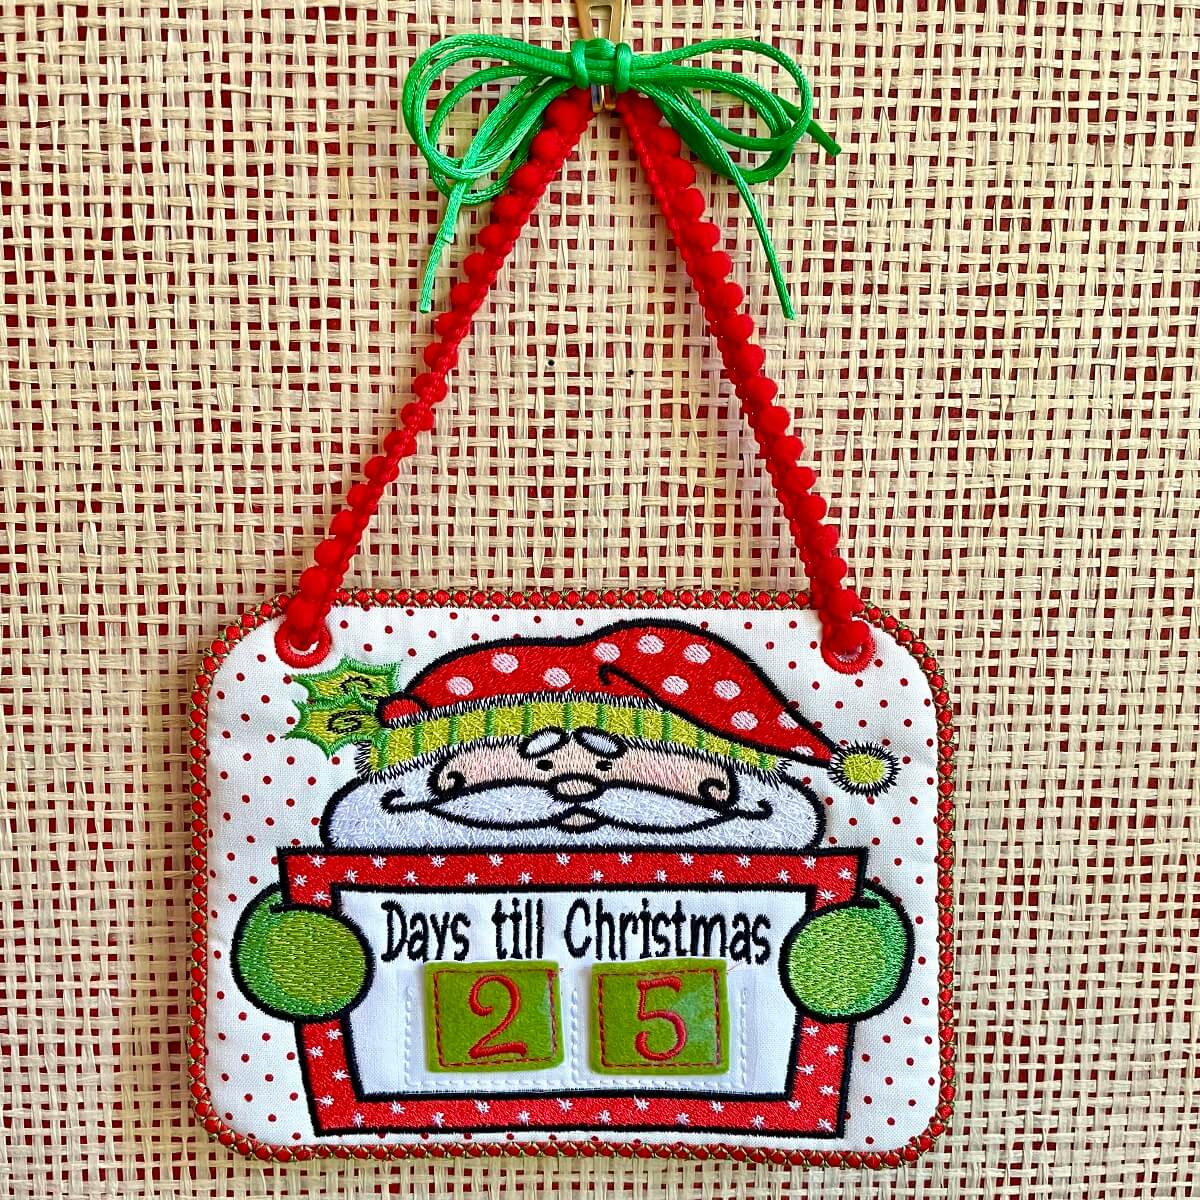 Countdown to Christmas Santa Calendar | In-the-hoop embroidery project